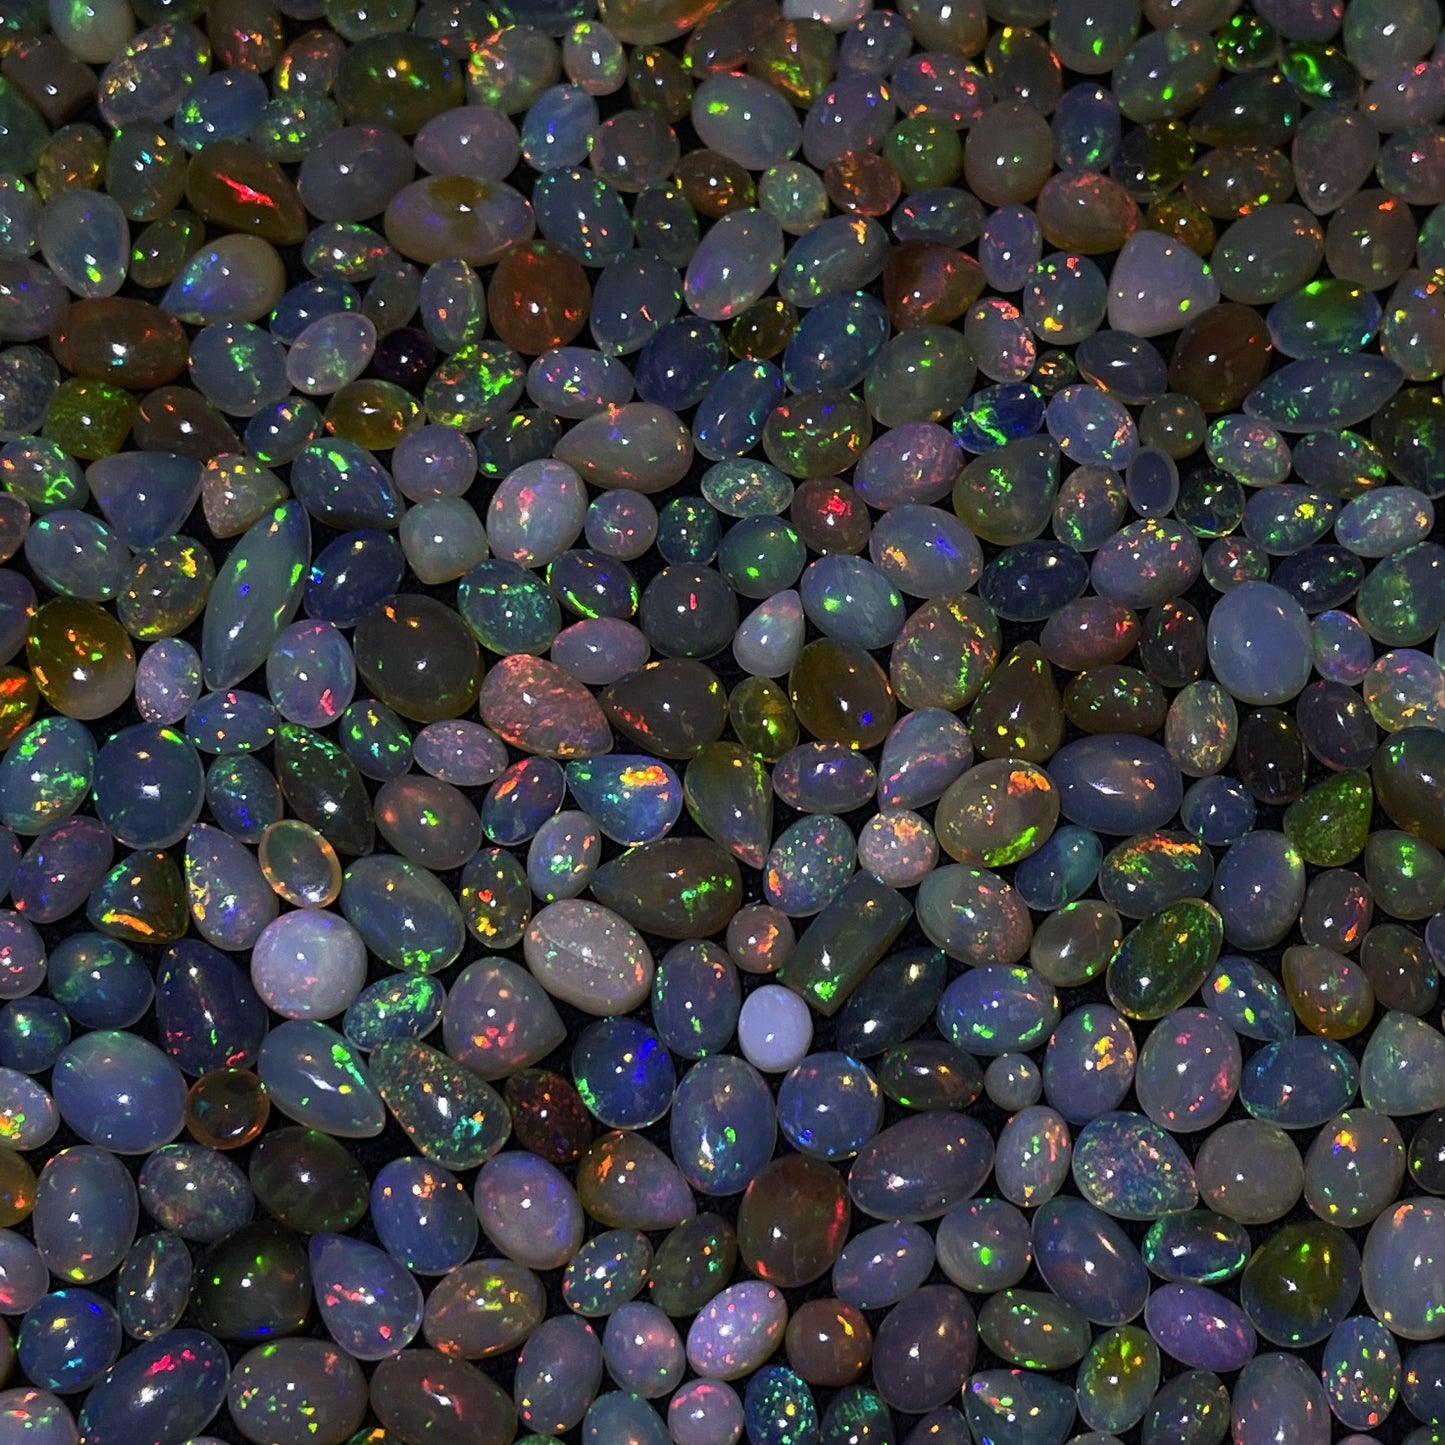 Exquisite Natural Ethiopian Opal Cabochon: Stunning 0.4 cts of Natural Beauty